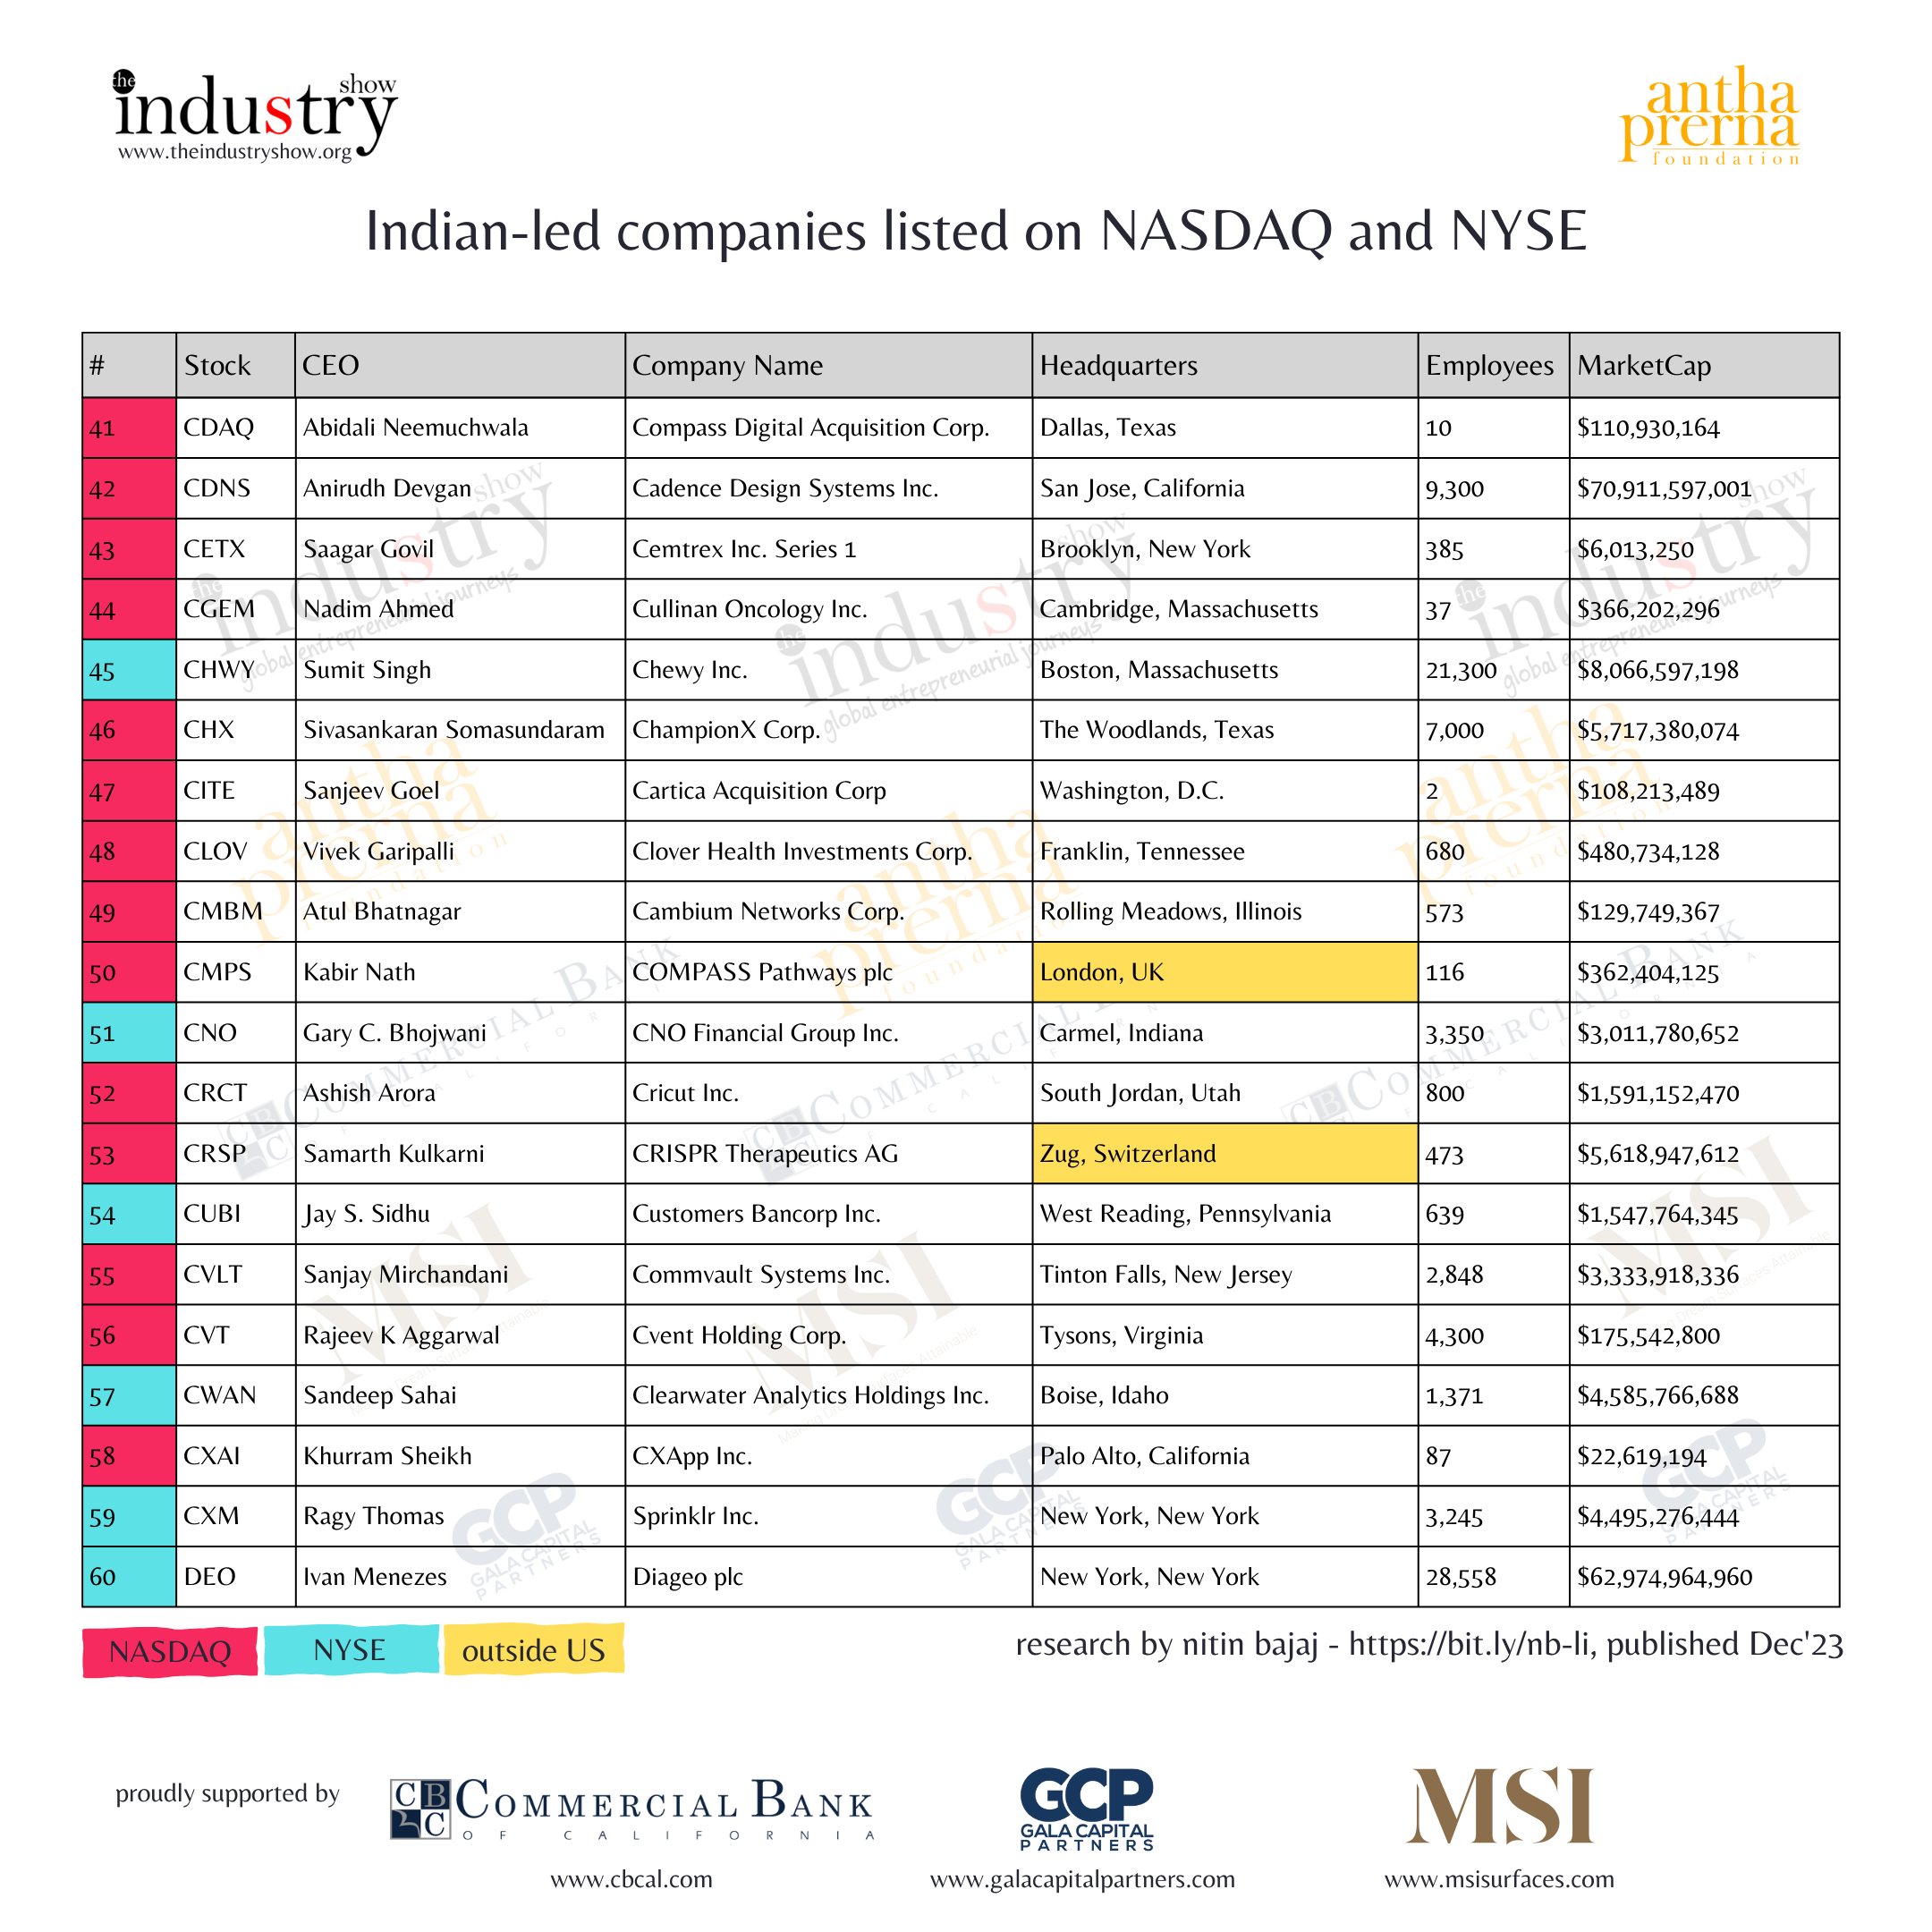 Indian-led companies listed on NASDAQ and NYSE